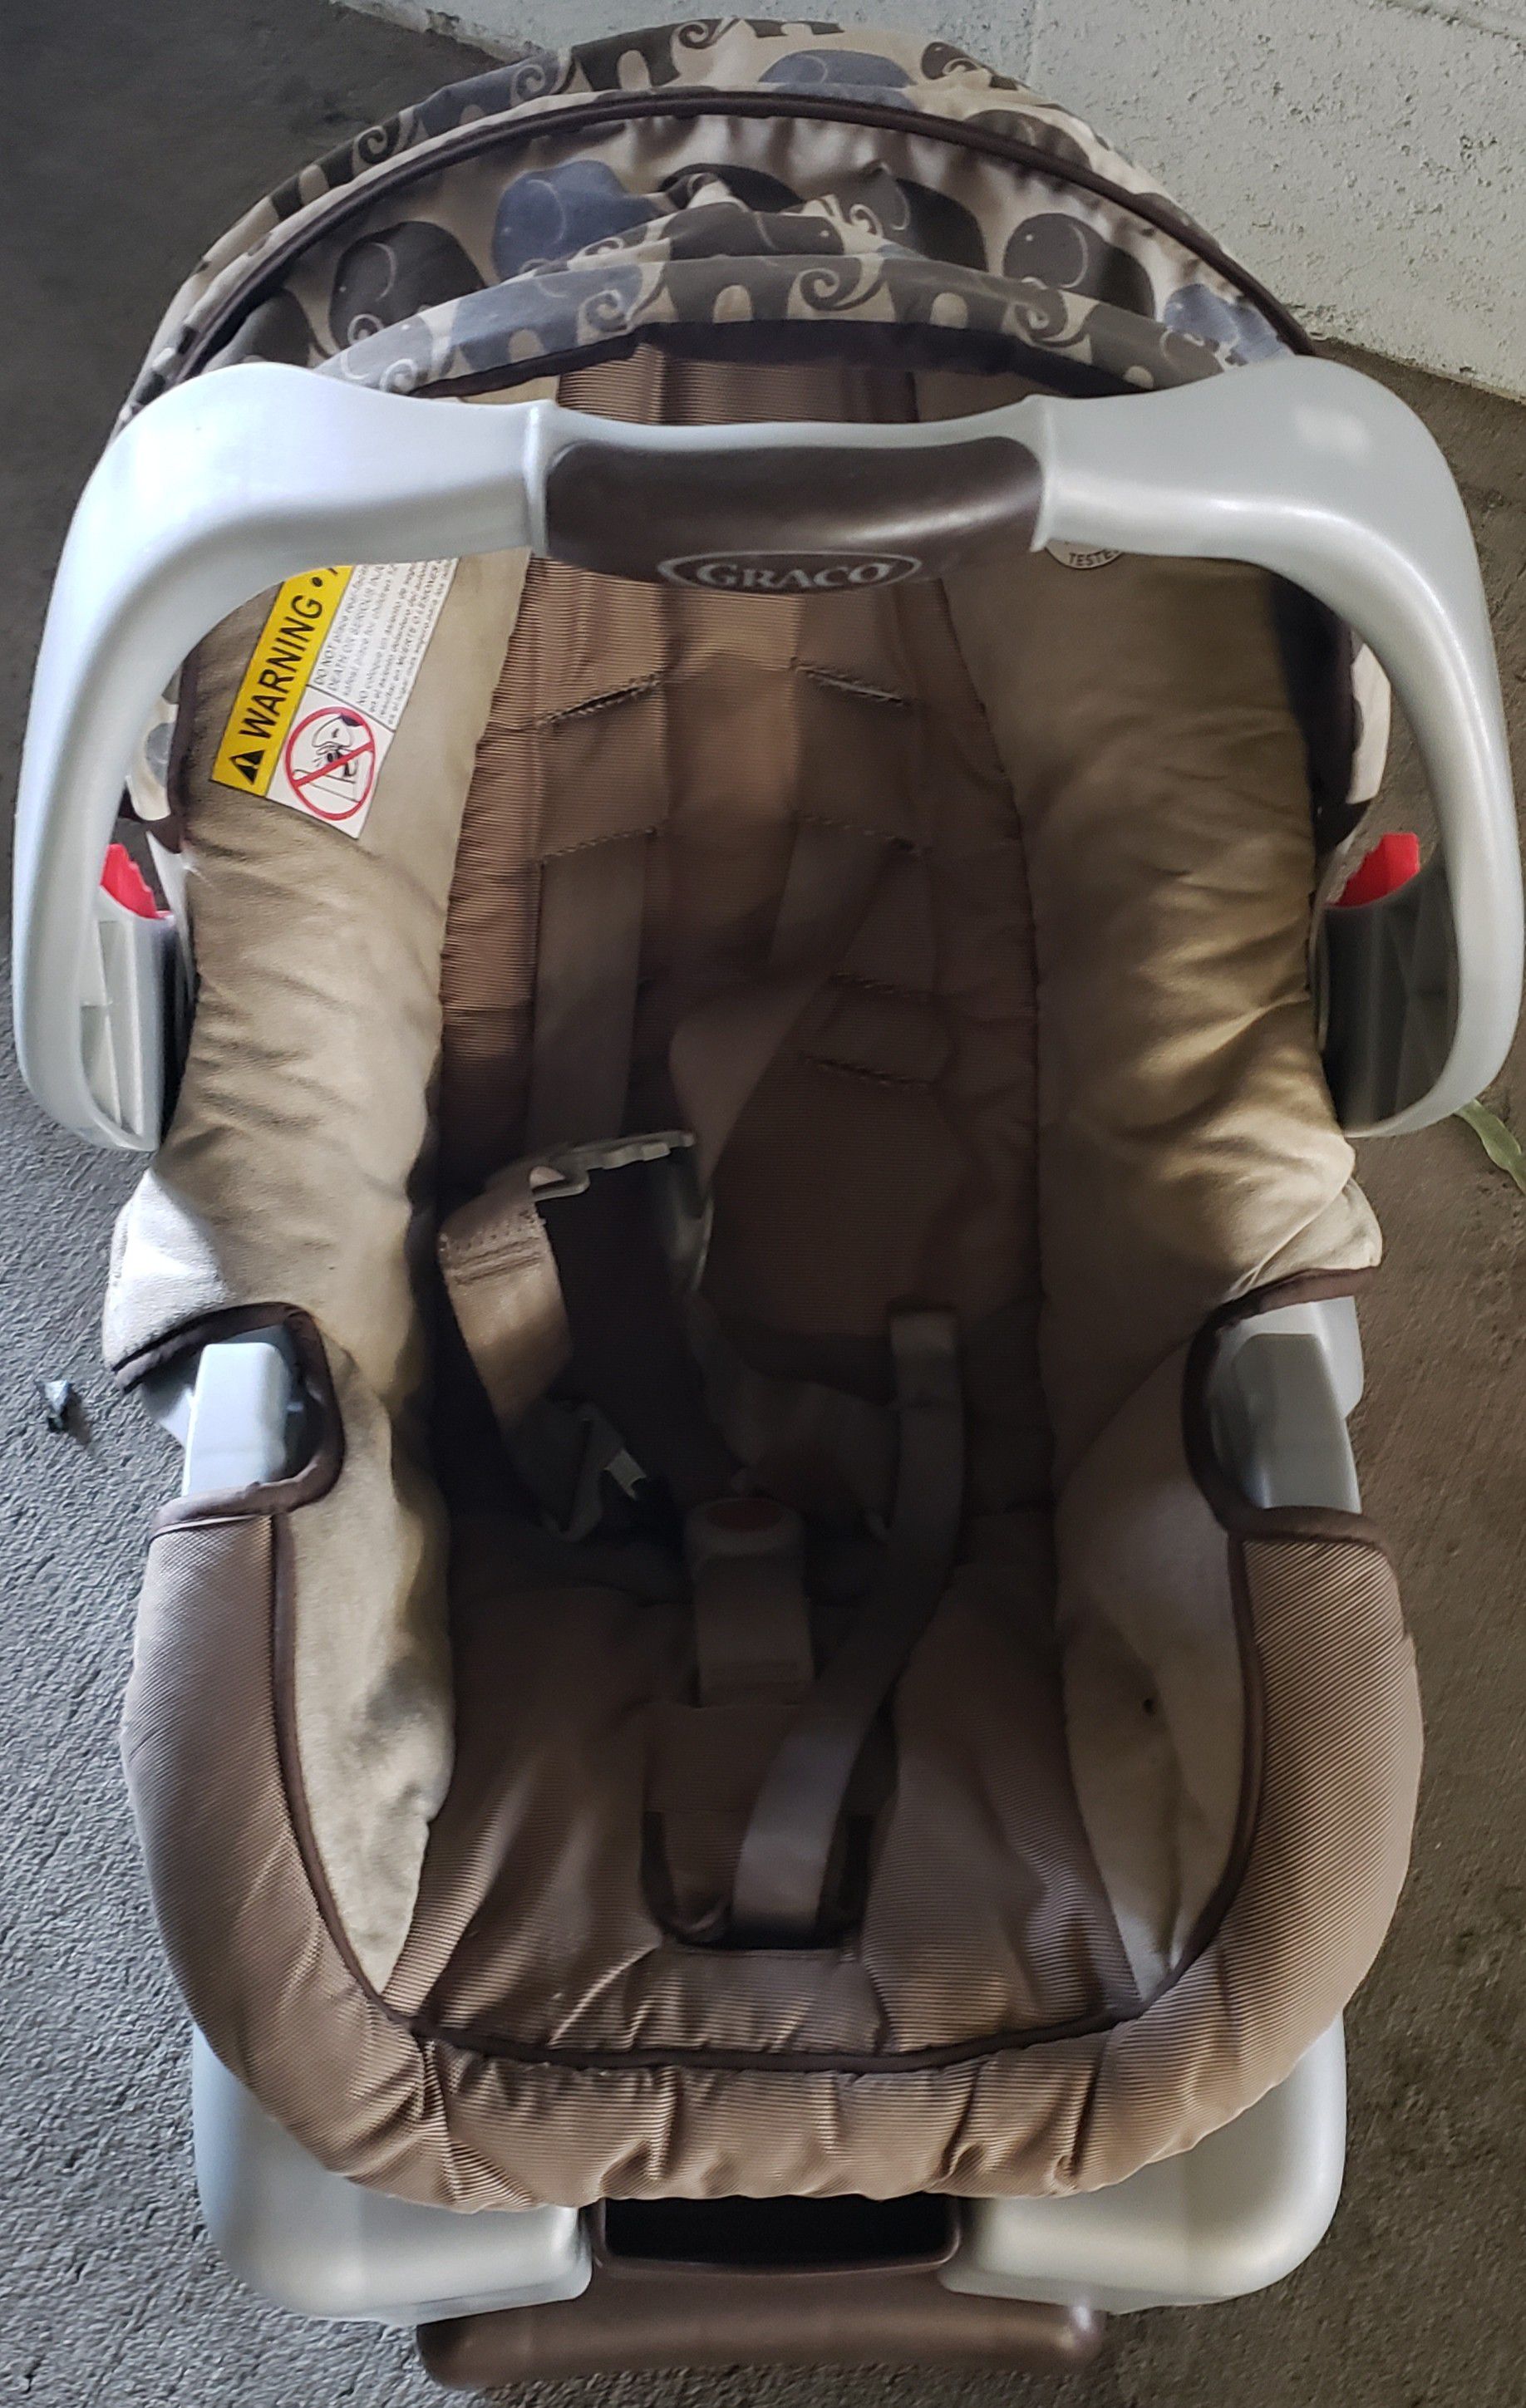 GRACO GREAT CONDITION CAR SEAT...$15 OBO